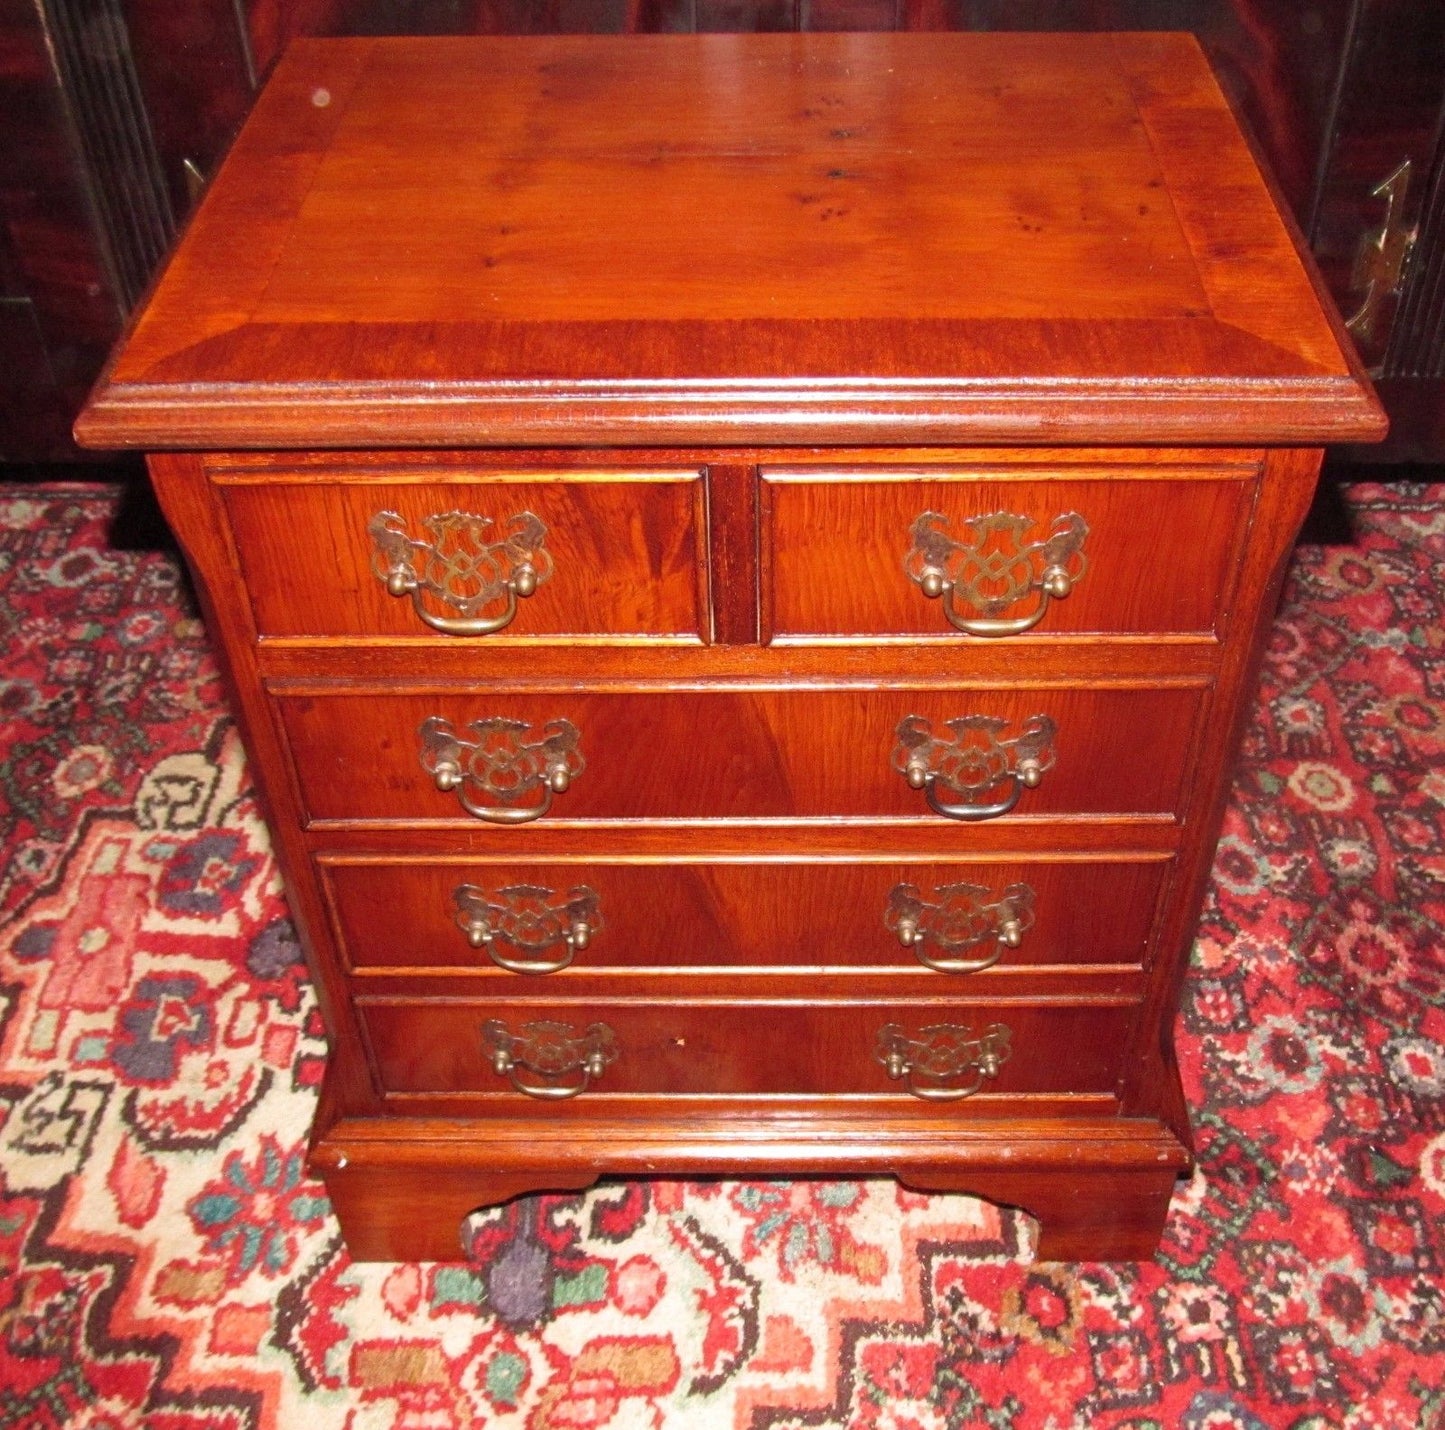 FINE MAHOGANY CHIPPENDALE STYLED CROSS BAND INLAID "MINI CHEST"-FINE BRASSES